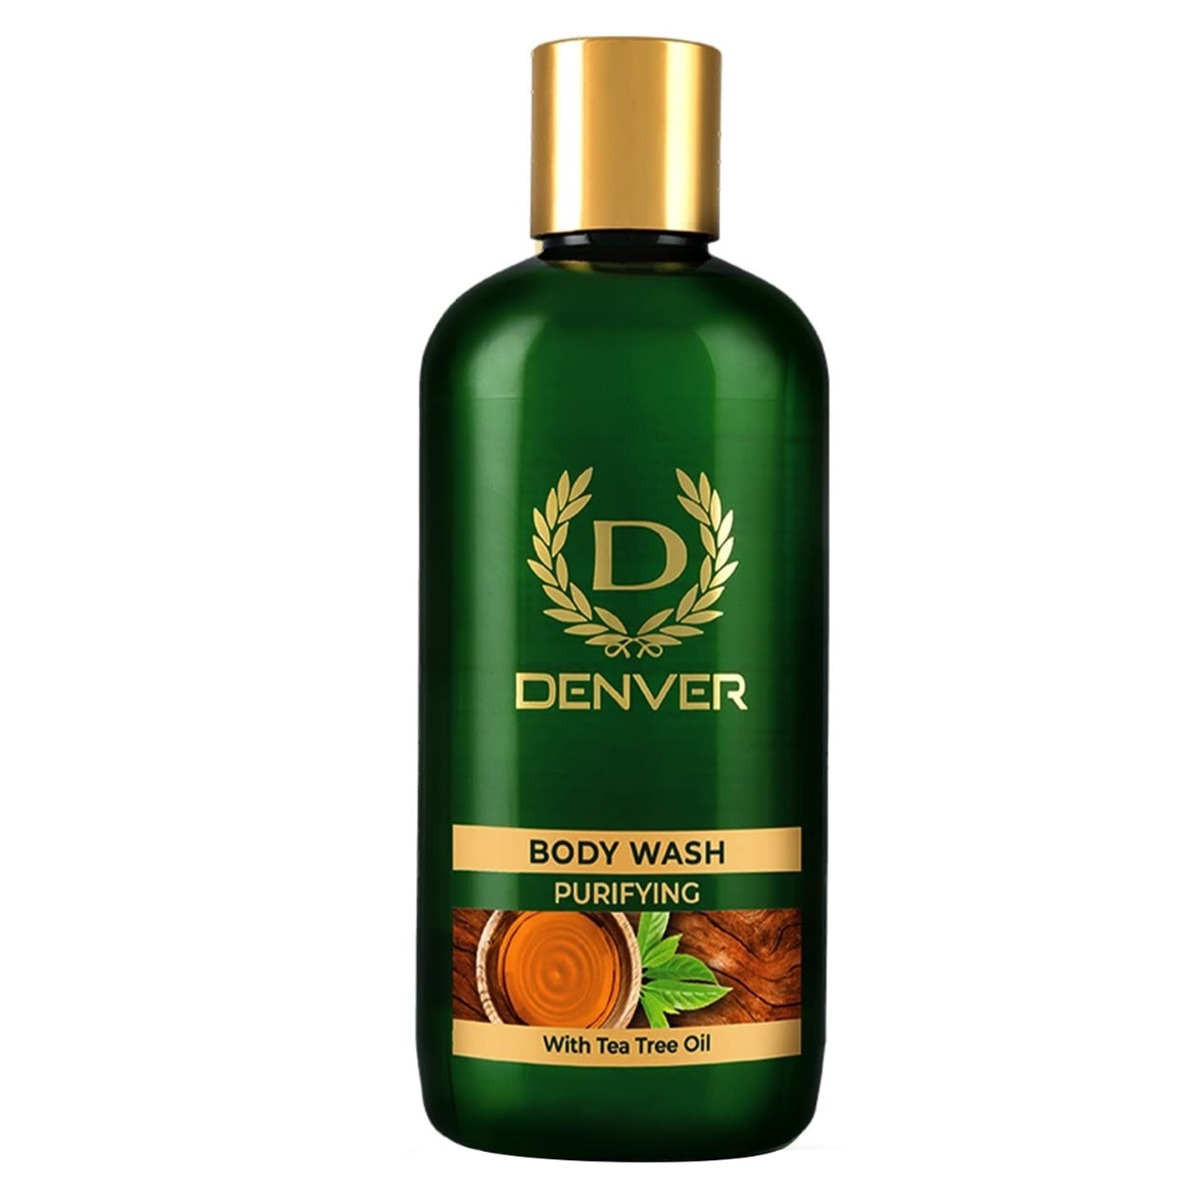 Denver Purifying Body Wash With Tea Tree Oil, 325ml